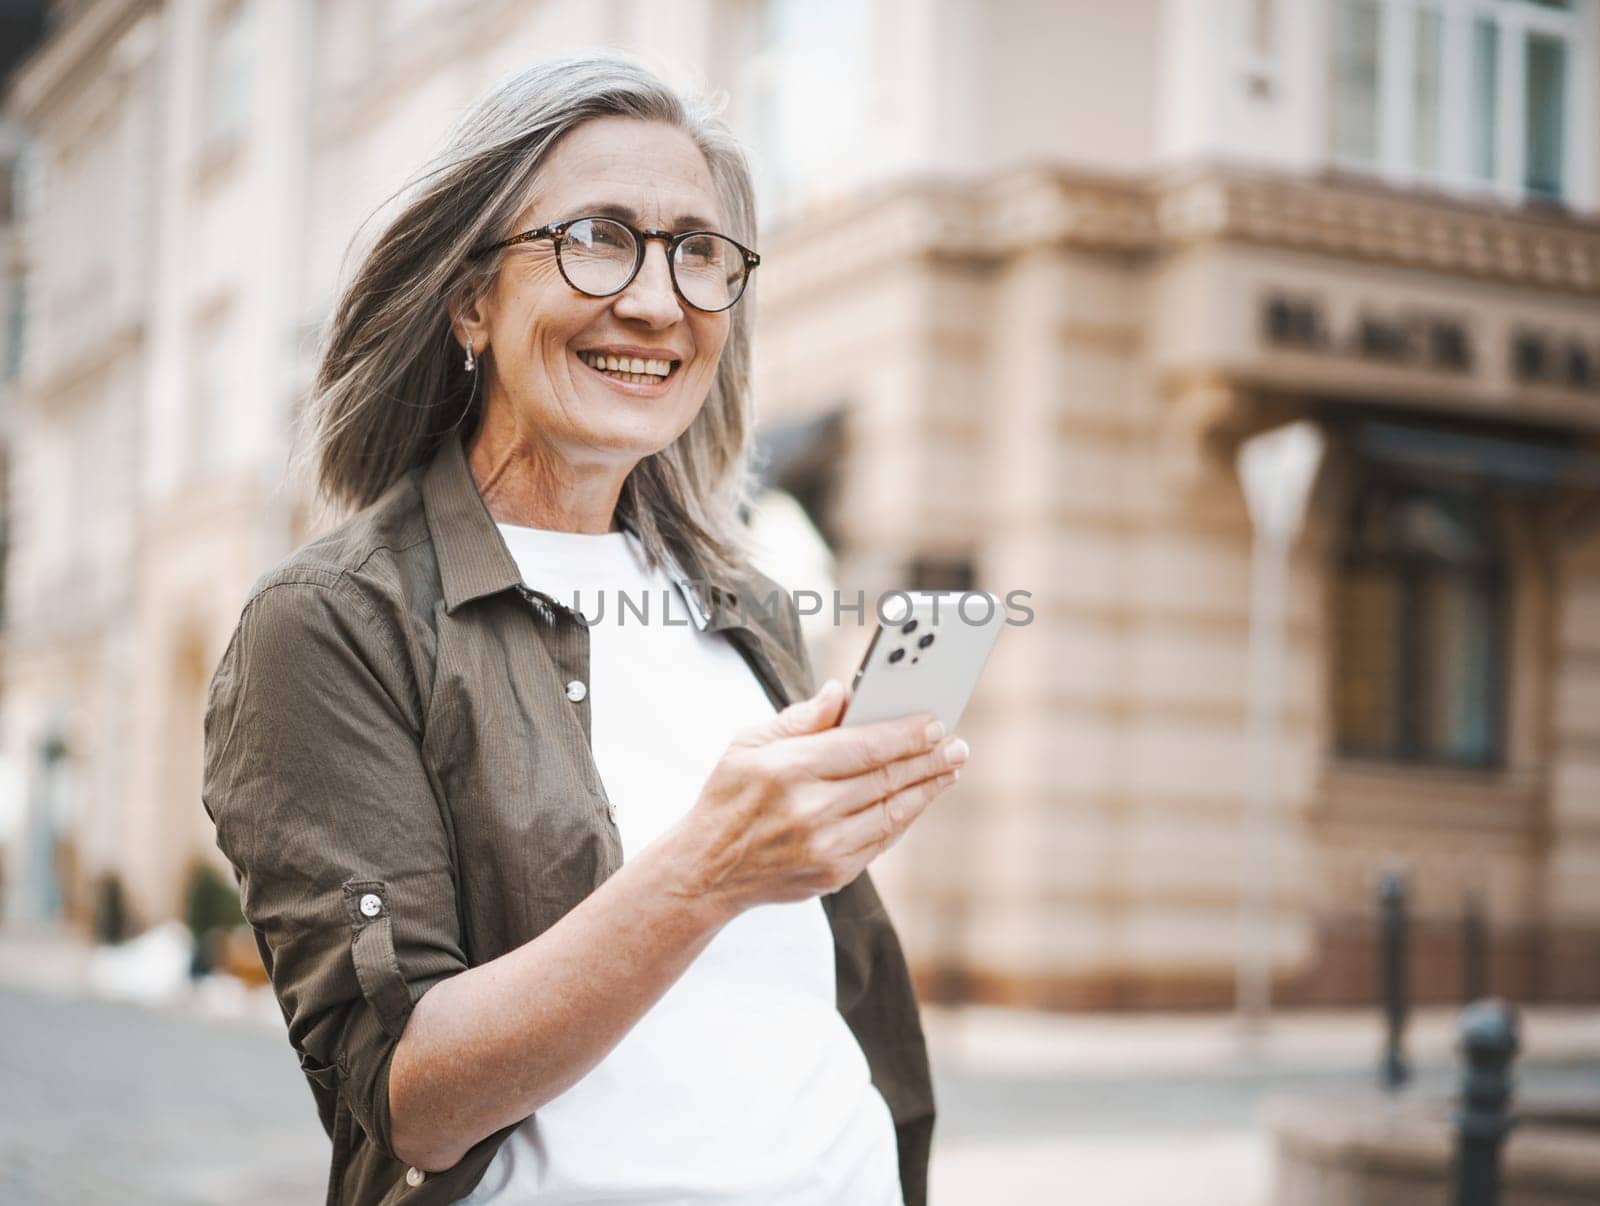 Old caucasian woman texting message on mobile phone while standing on street in old town of Europe. Seamless blend of modern technology with historic charm of surroundings. . High quality photo